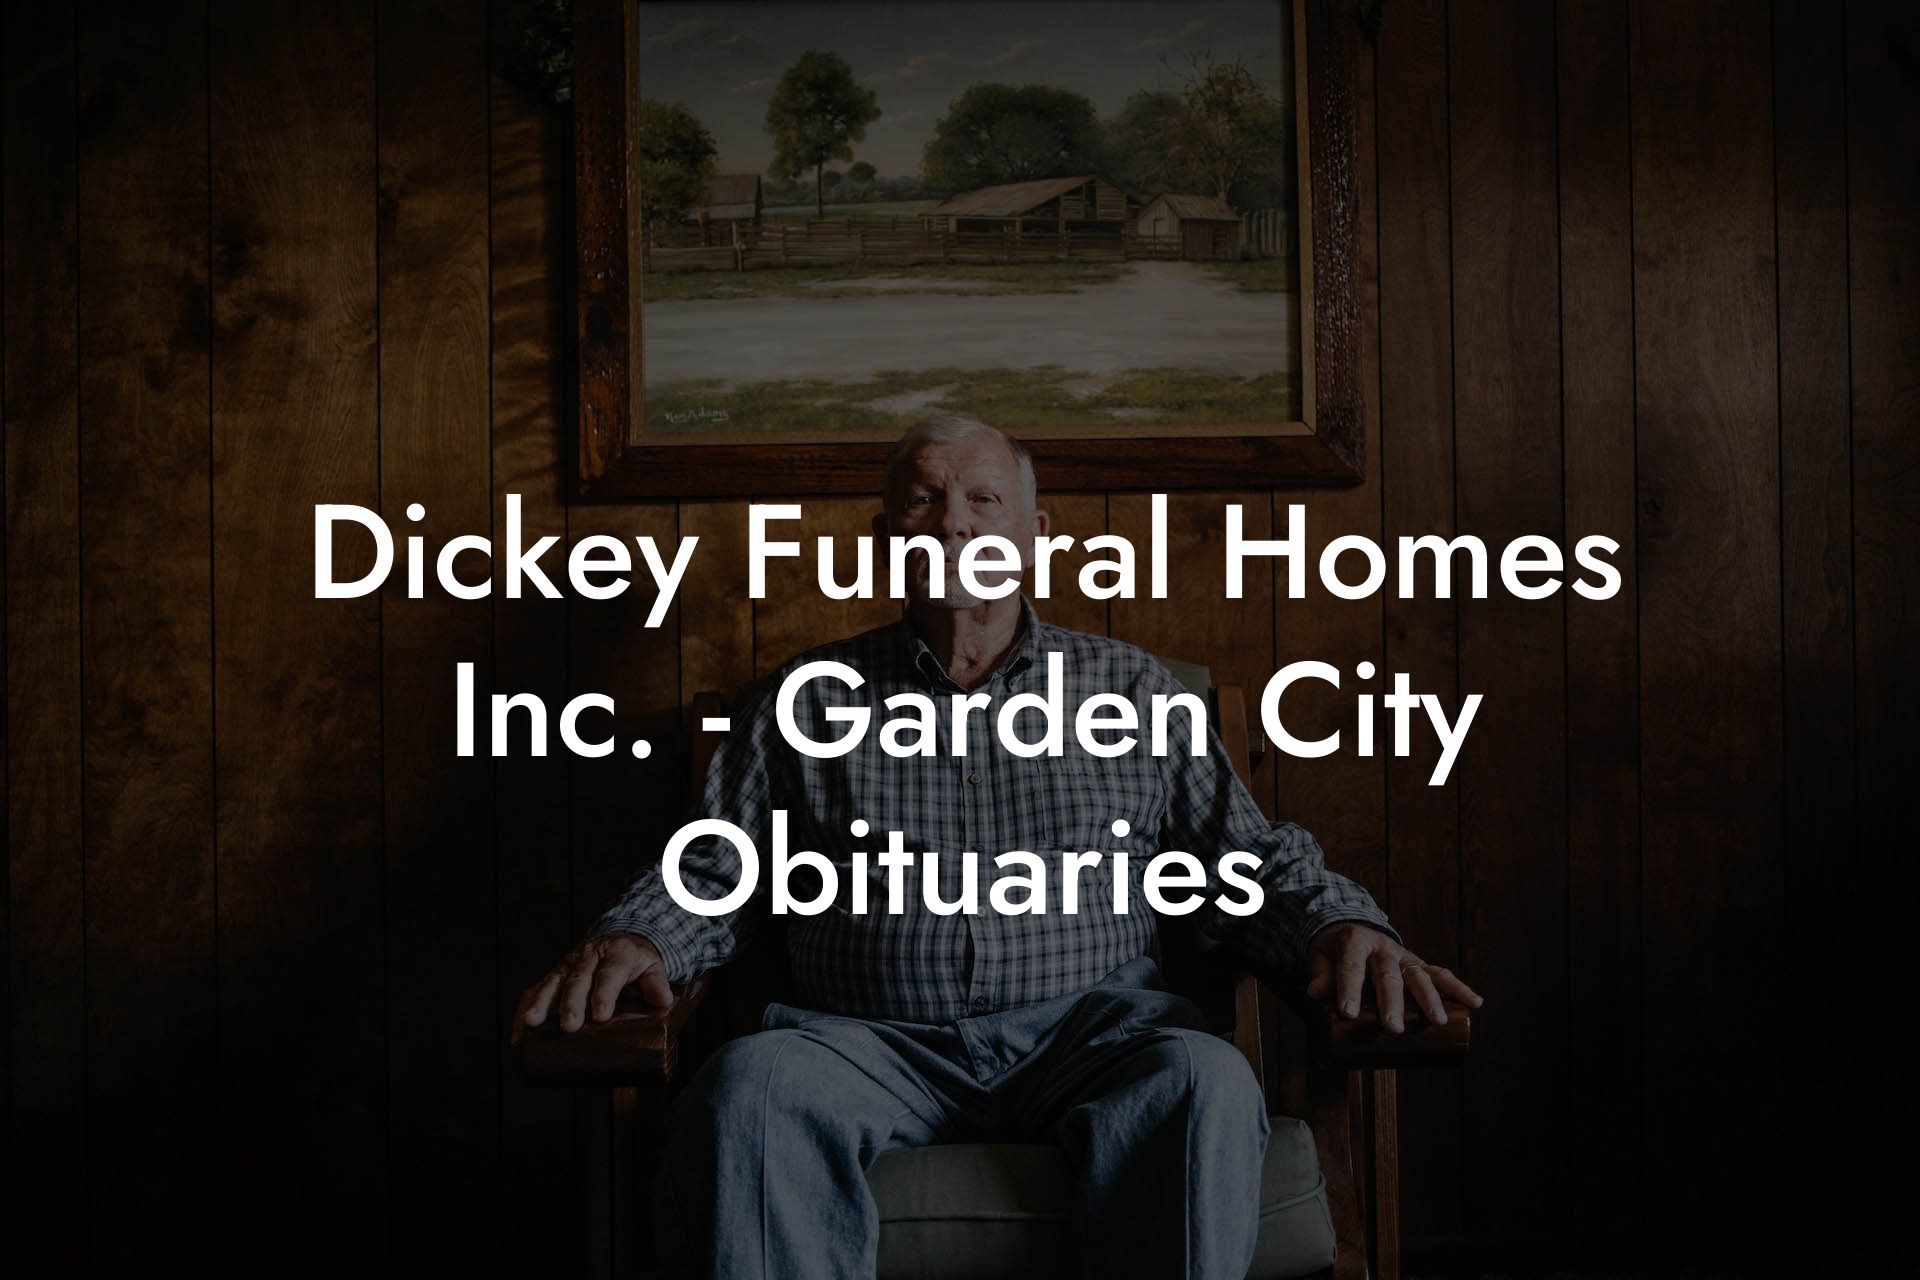 Dickey Funeral Homes Inc. - Garden City Obituaries